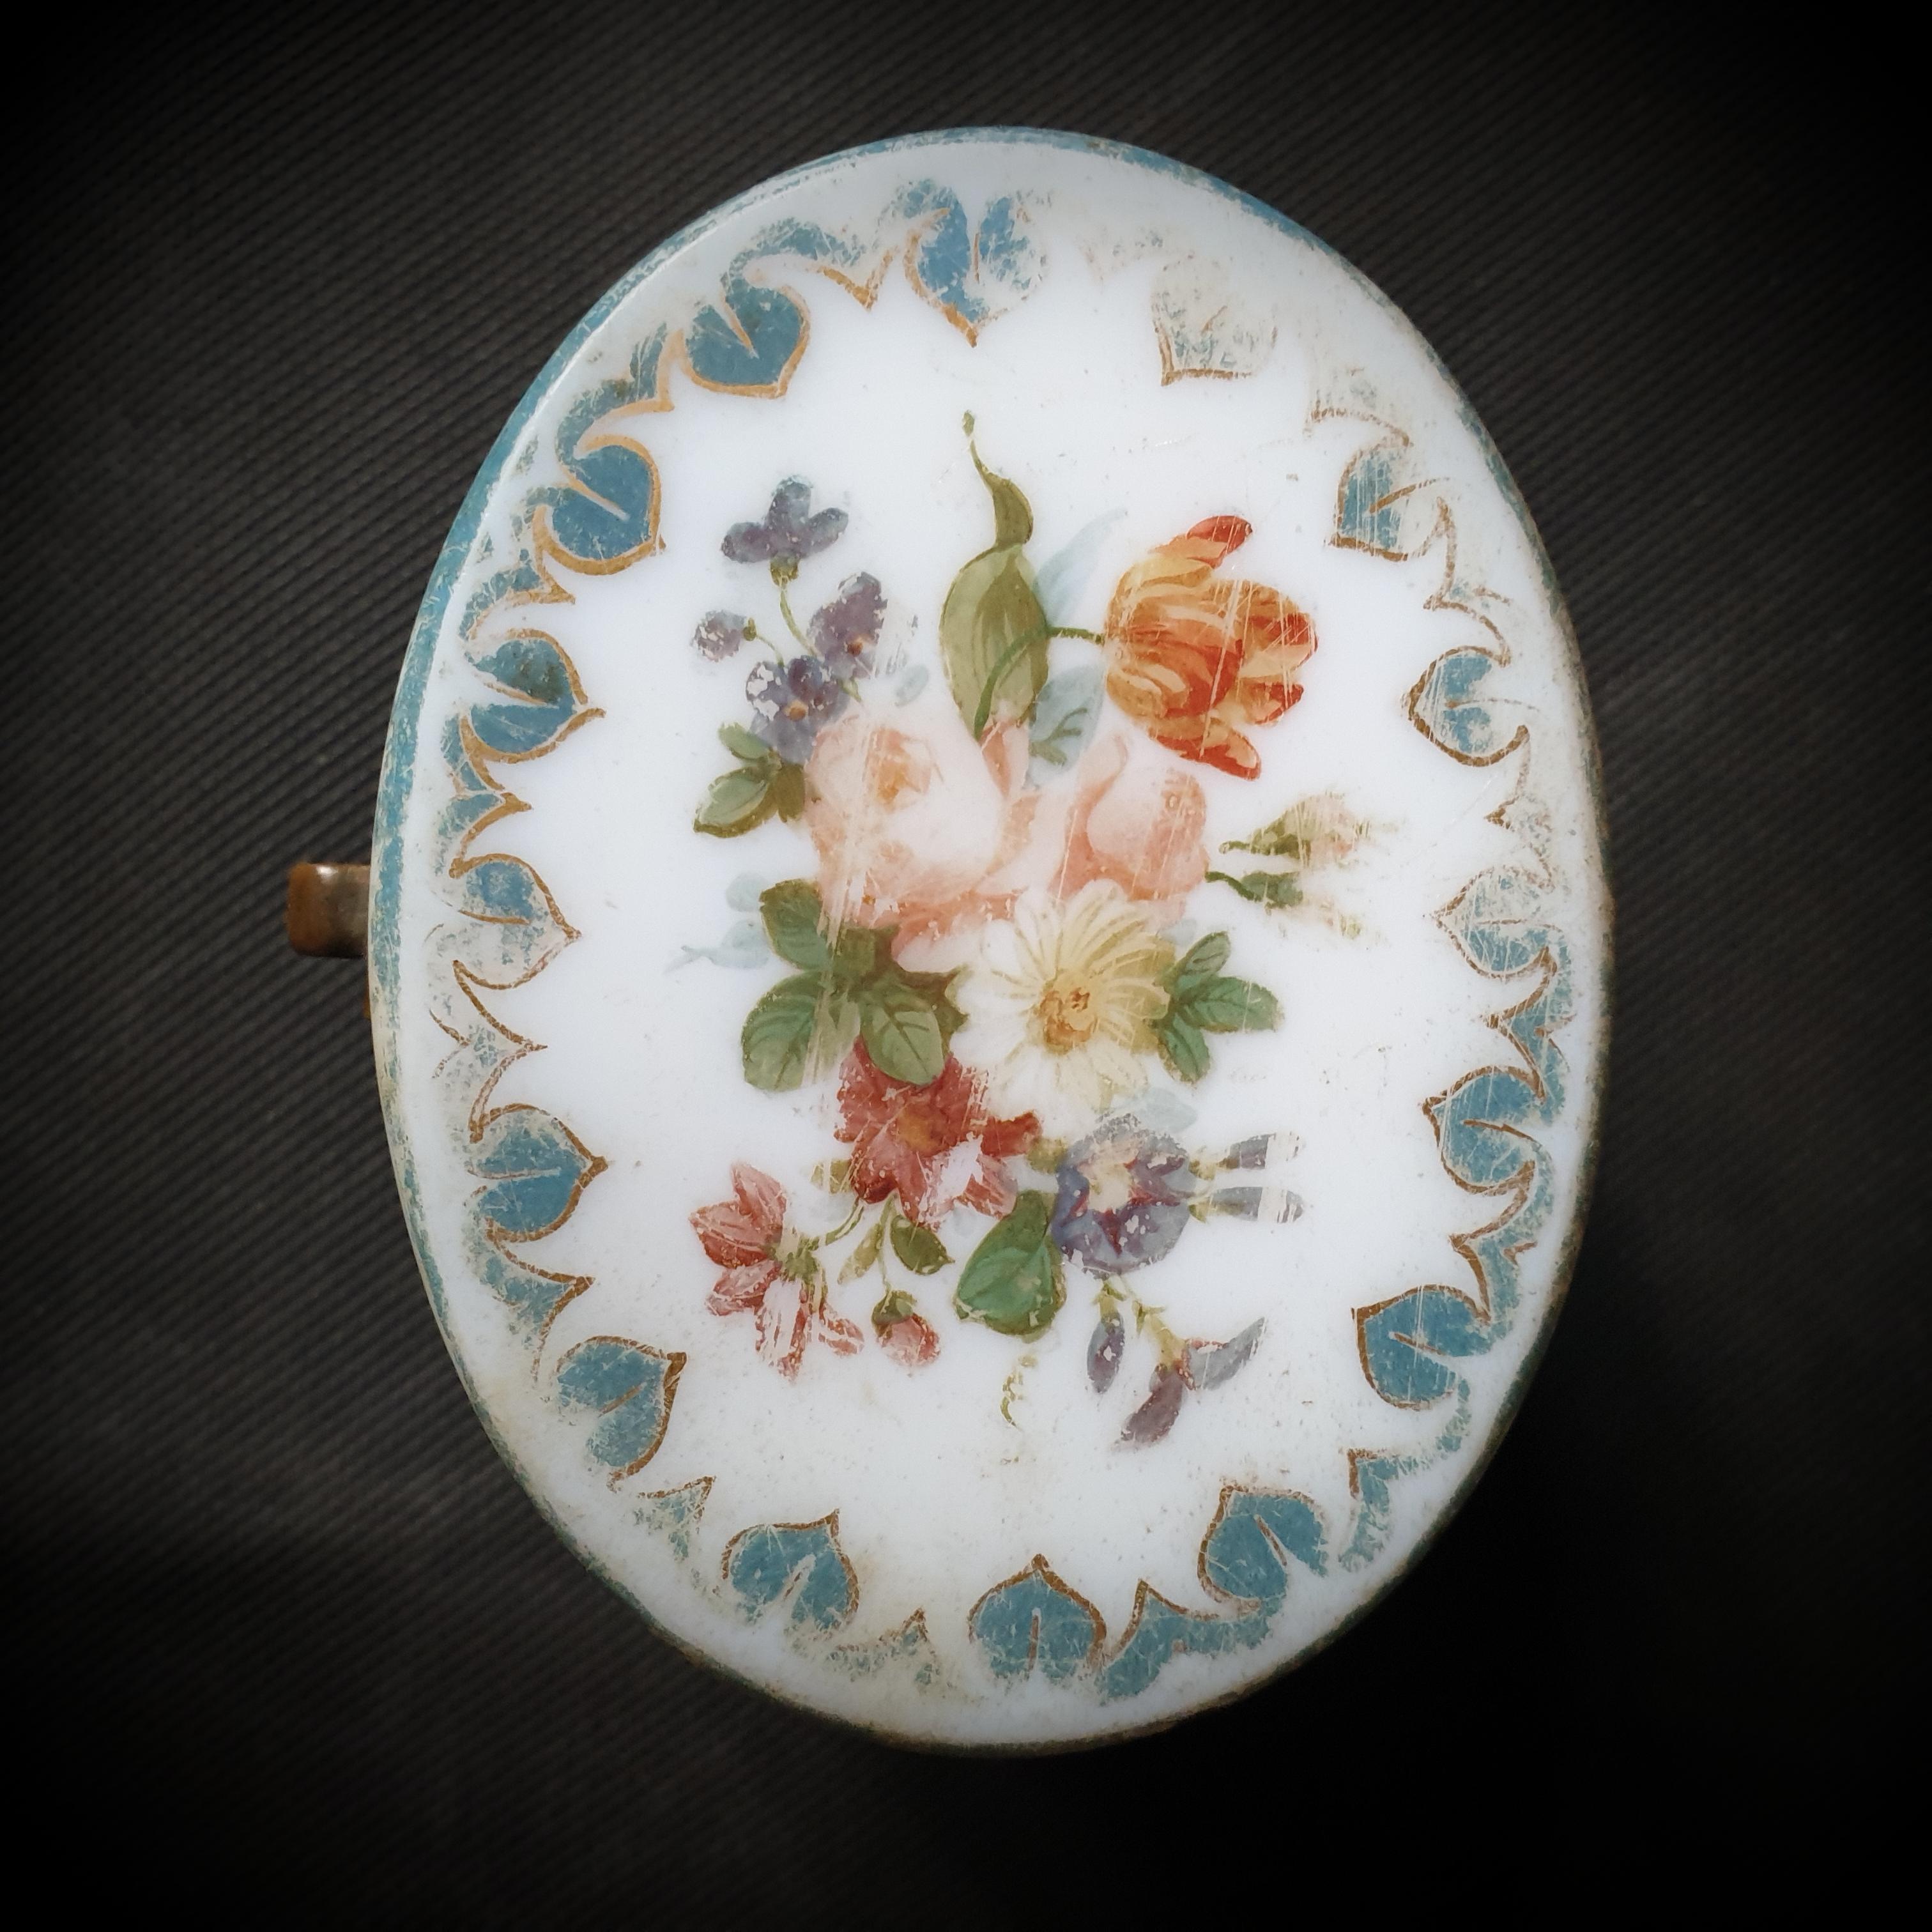 Presenting a classic 19th-century French craftsmanship treasure: a gorgeous opaline glass box with a lovely flower design! Save your most prized possession in this 7.5x9.5x7.5 cm circular, transparent, gilded, and painted box with delicate blue